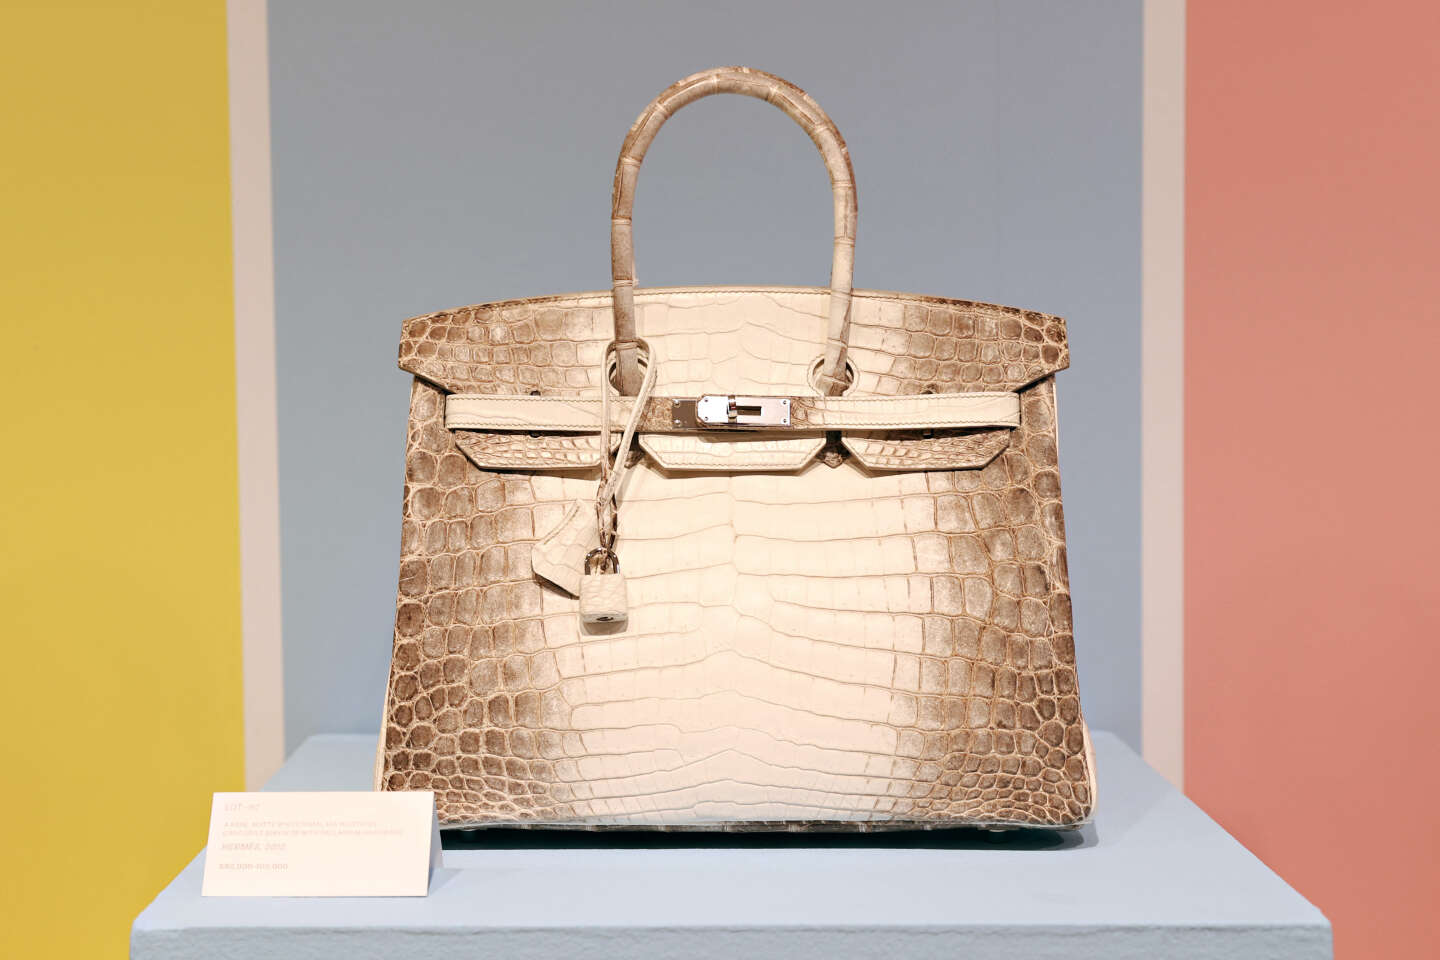 The Hermès bag is this season's hot investment